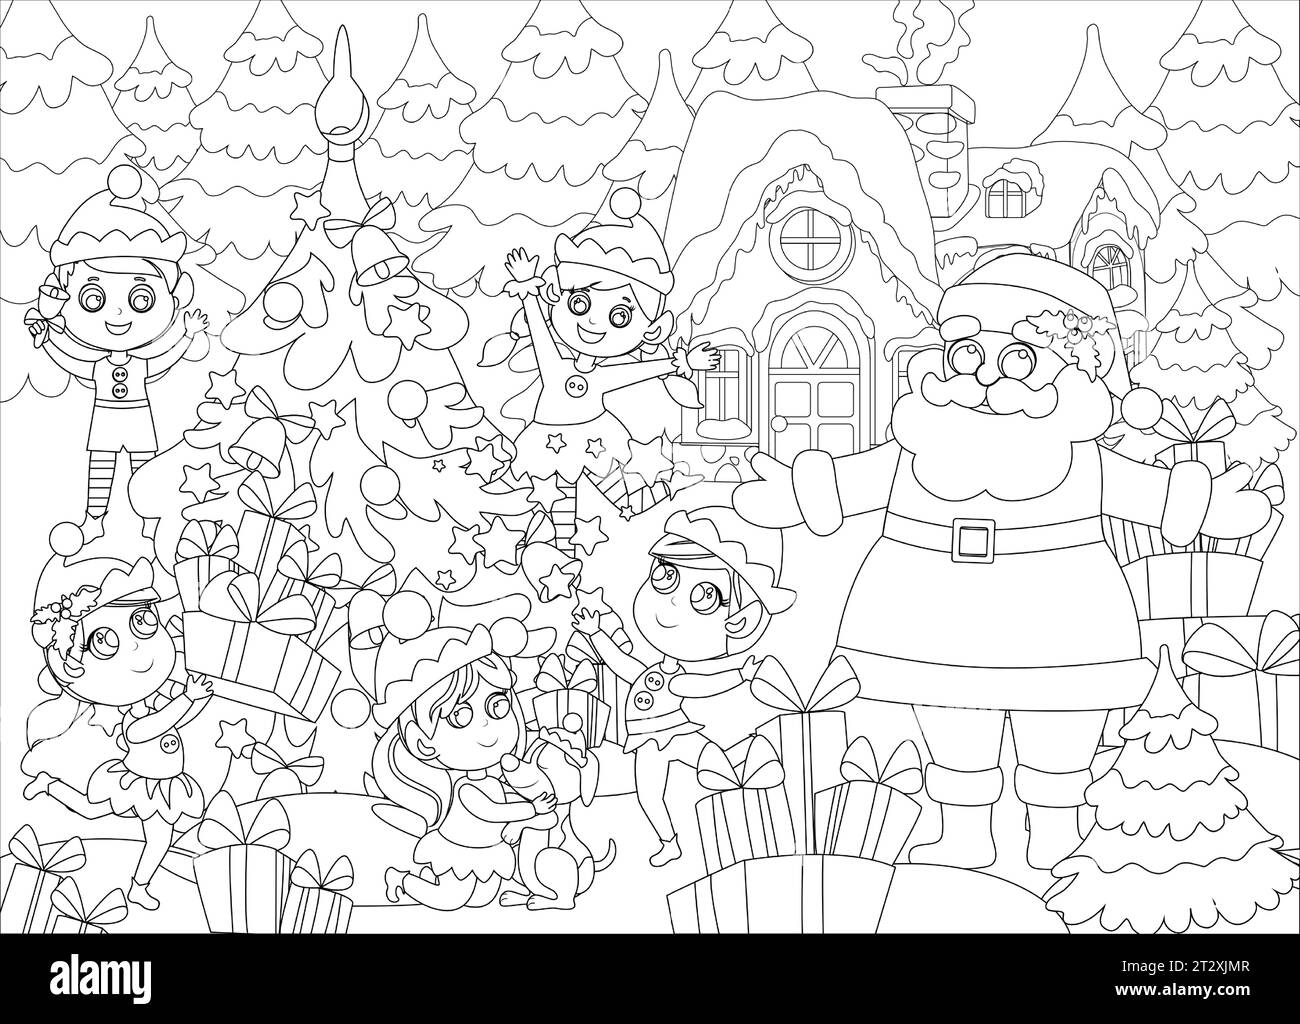 Coloring Pages. Santa Claus with elves outside near the Christmas tree. Winter landscape near Santa's snowy house. Mood of happiness and joy. Stock Vector